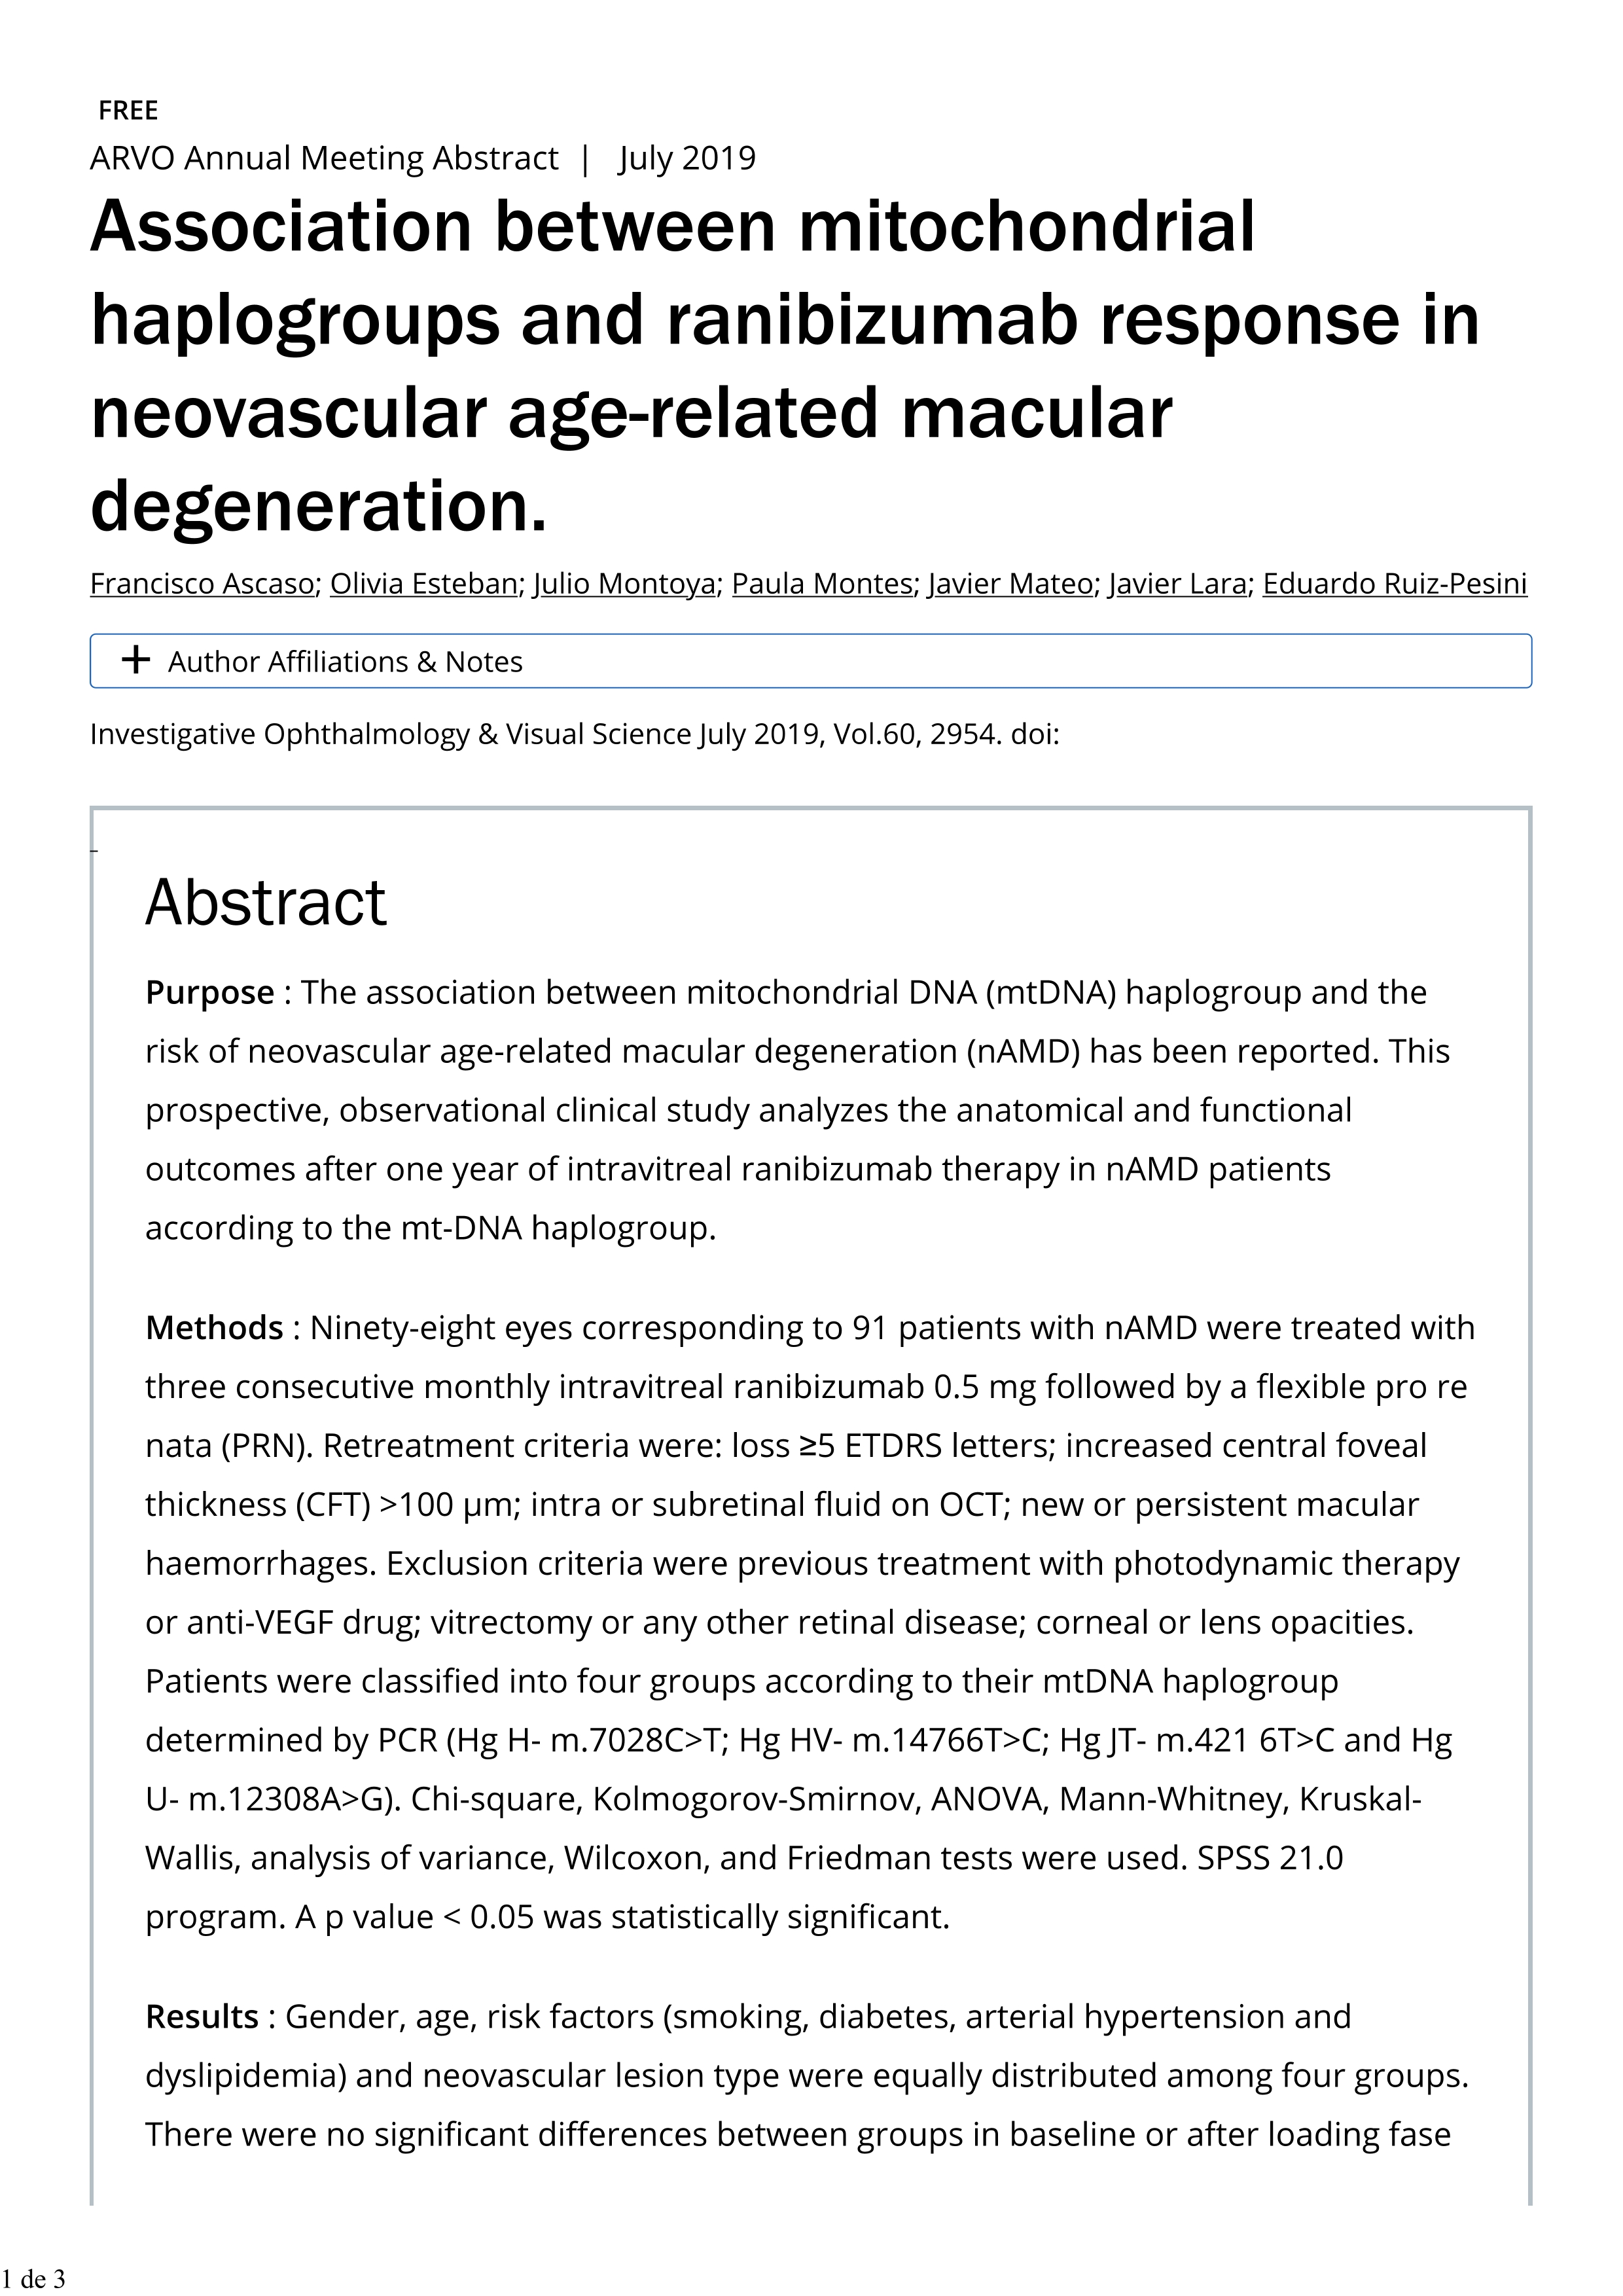 Association between mitochondrial haplogroups and ranibizumab response in neovascular age-related macular degeneration